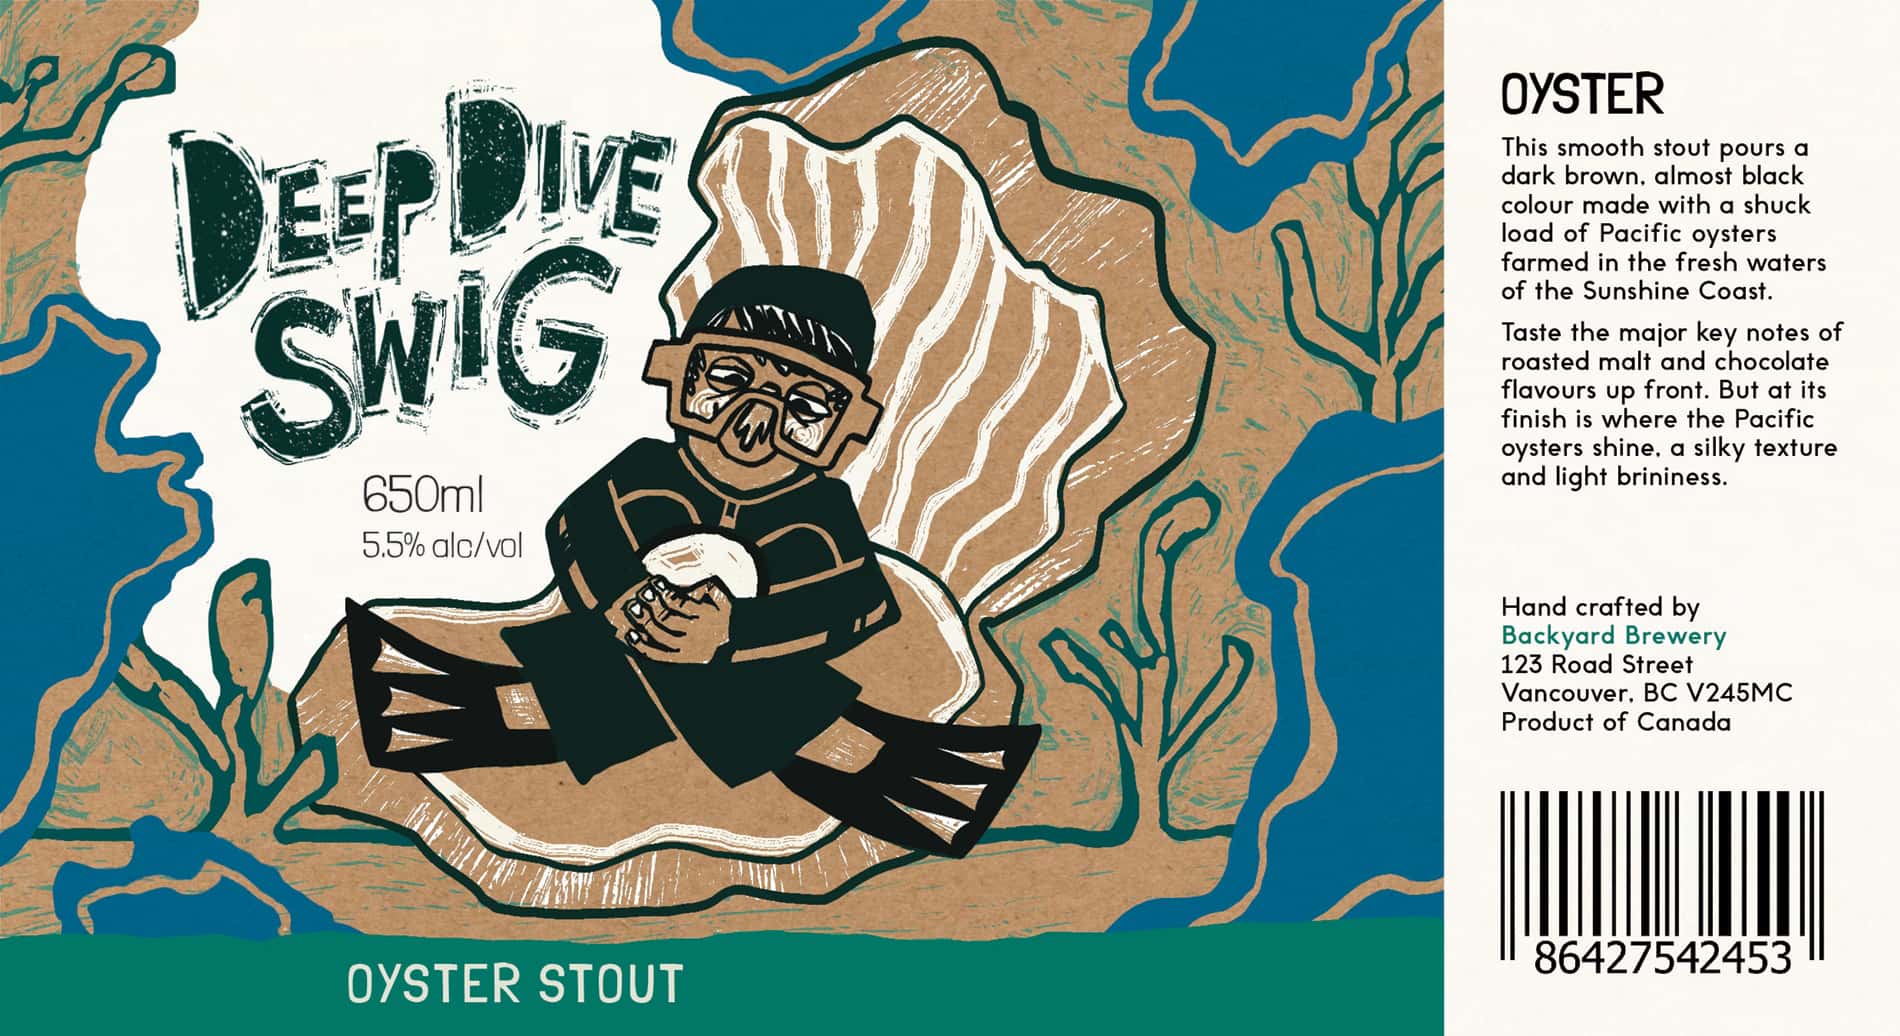 Backyard brewery oyster stout label design with an illustration of a scuba diver underwater holding a pearl while sitting inside an oyster